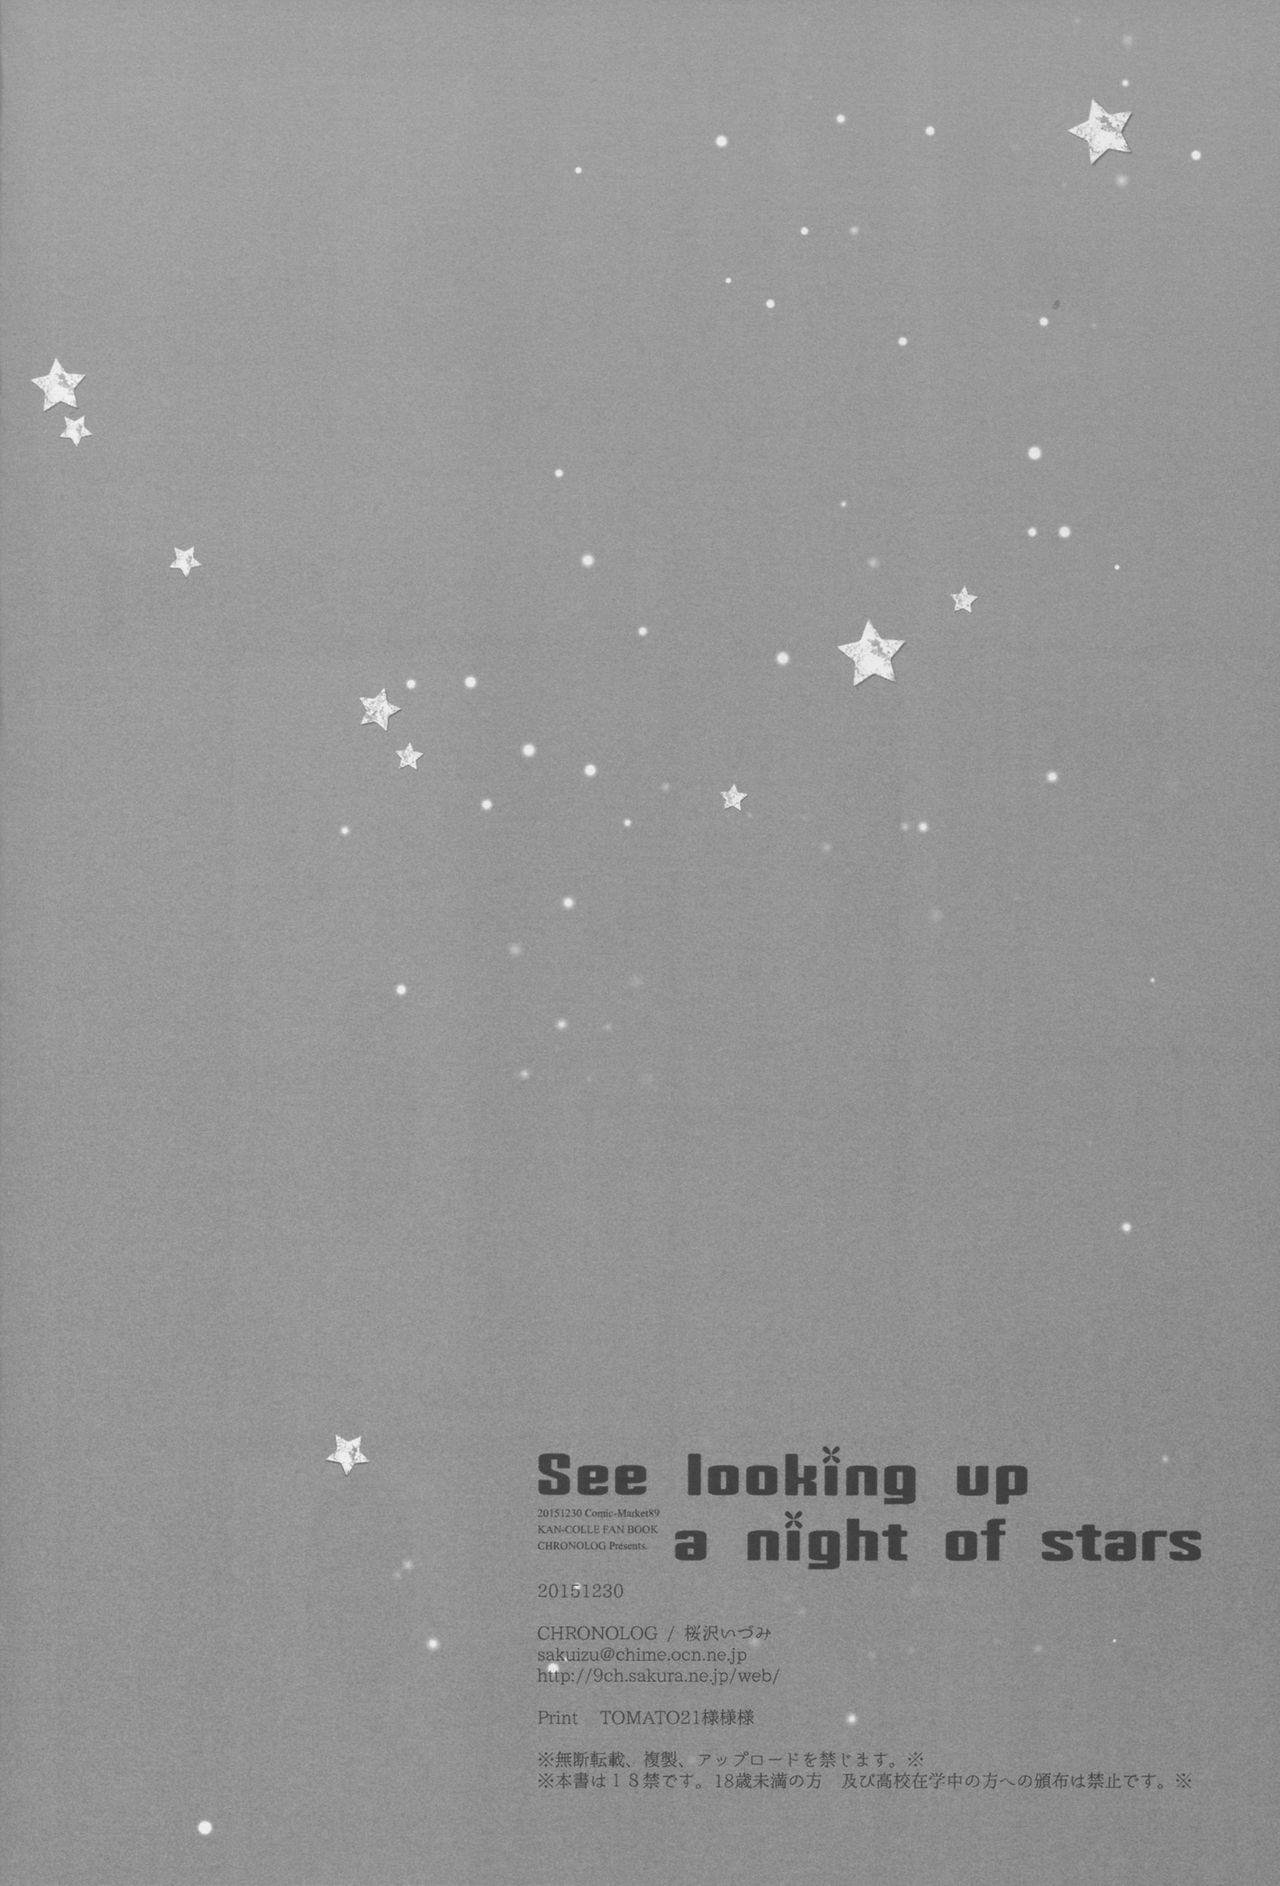 See looking up a night of stars 24